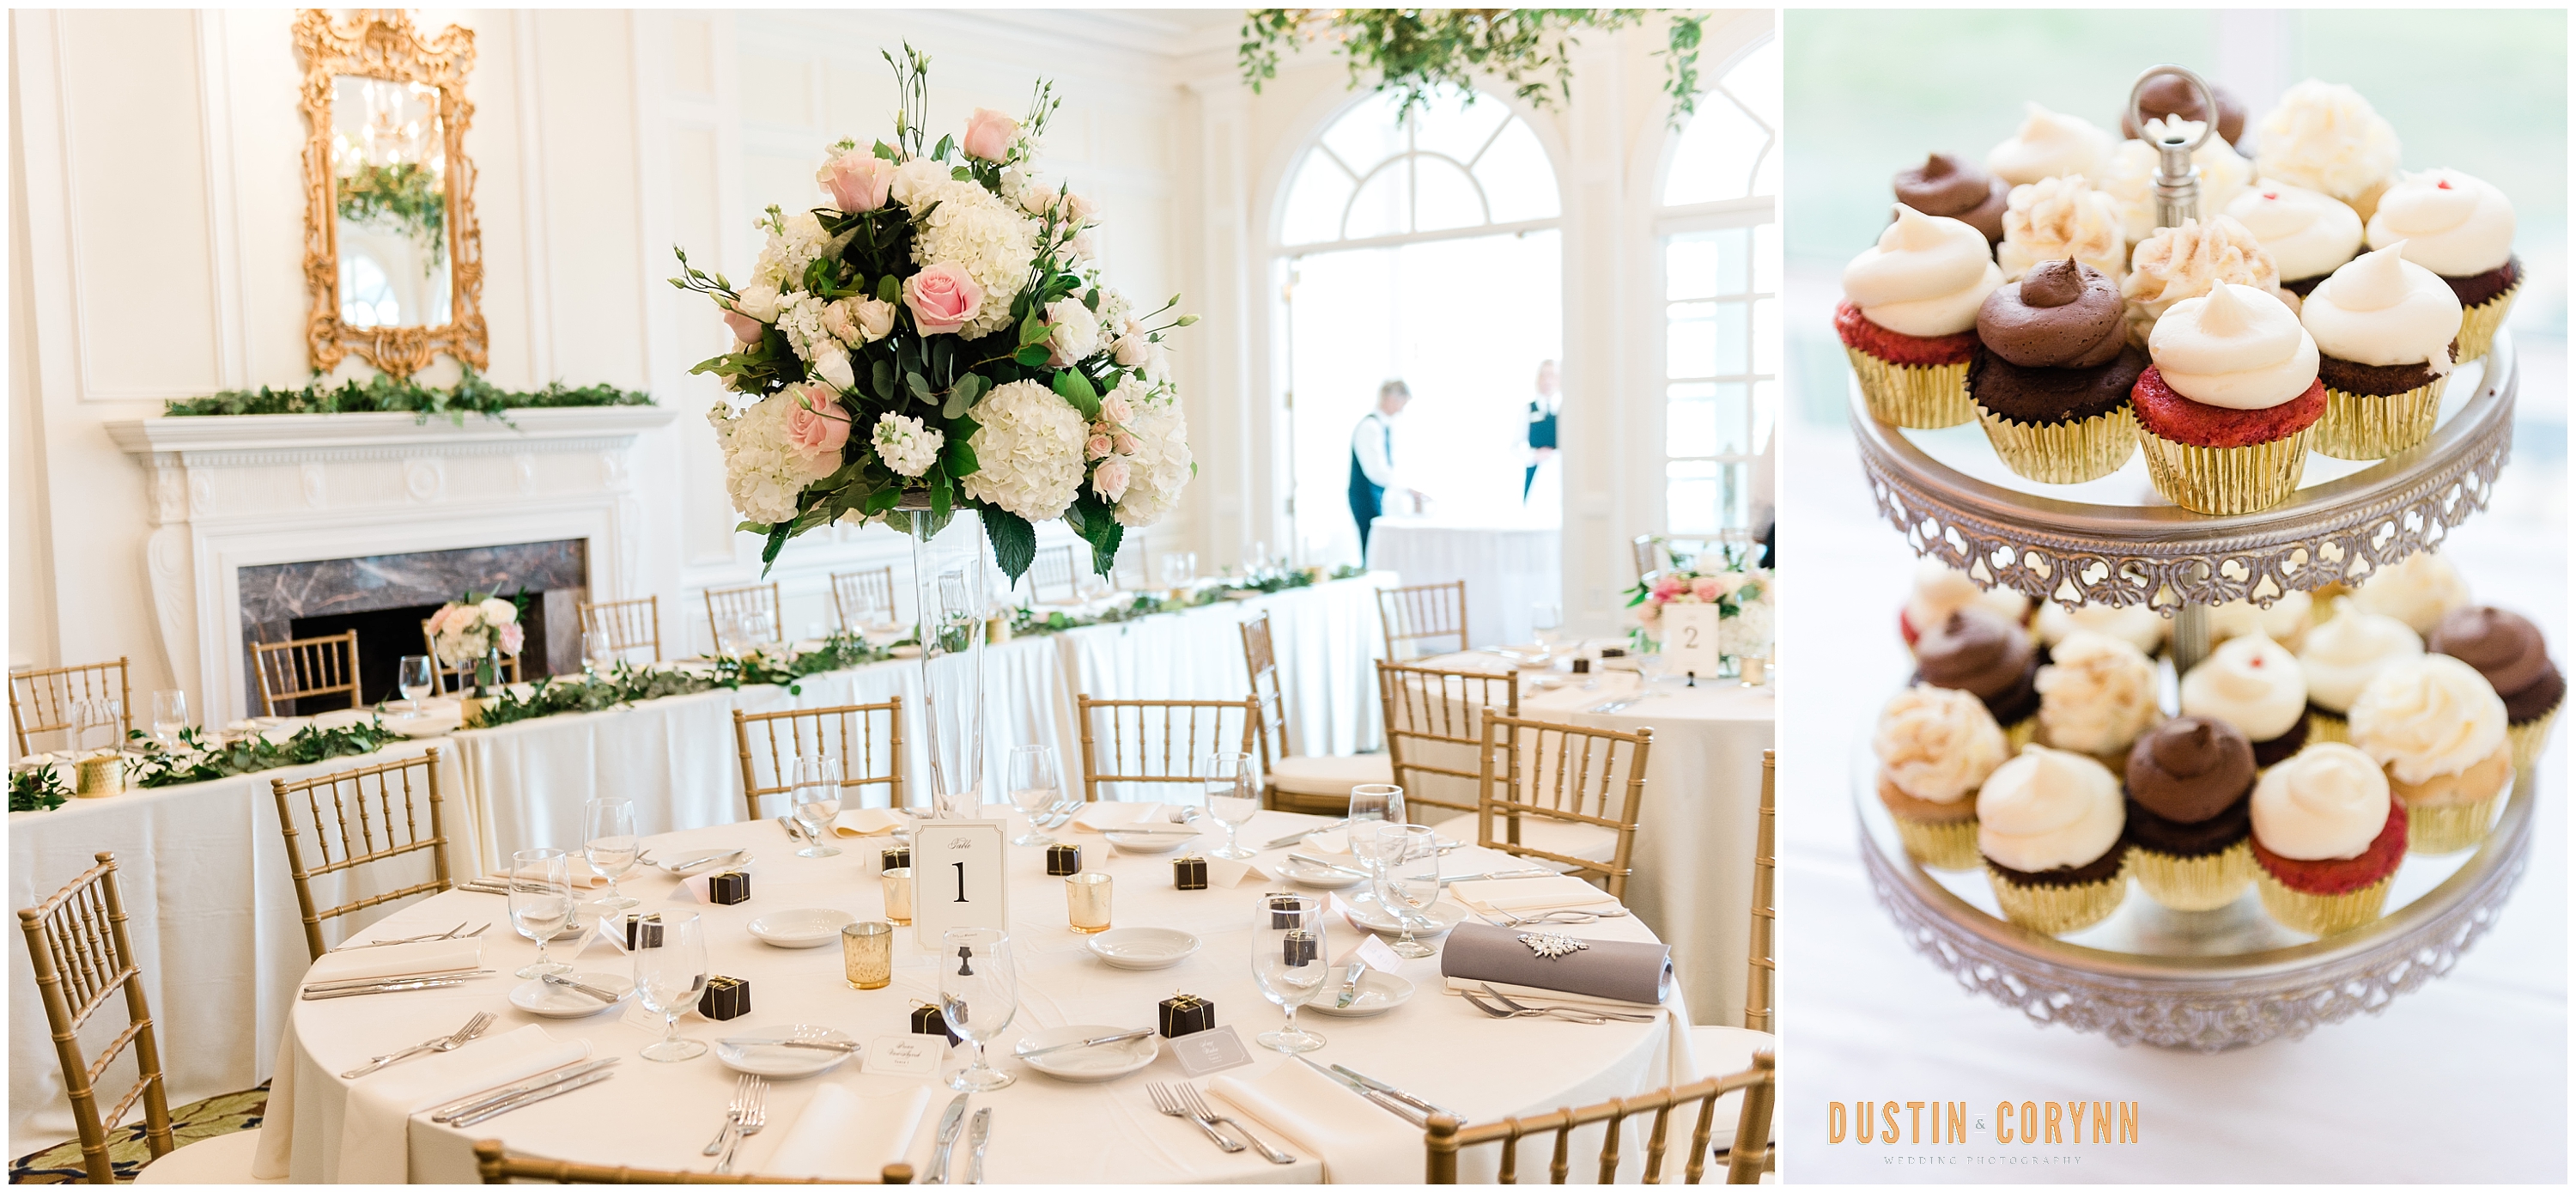 Fort Wayne wedding photographer captures Sycamore Hills Golf Club wedding reception space with desserts and table decor